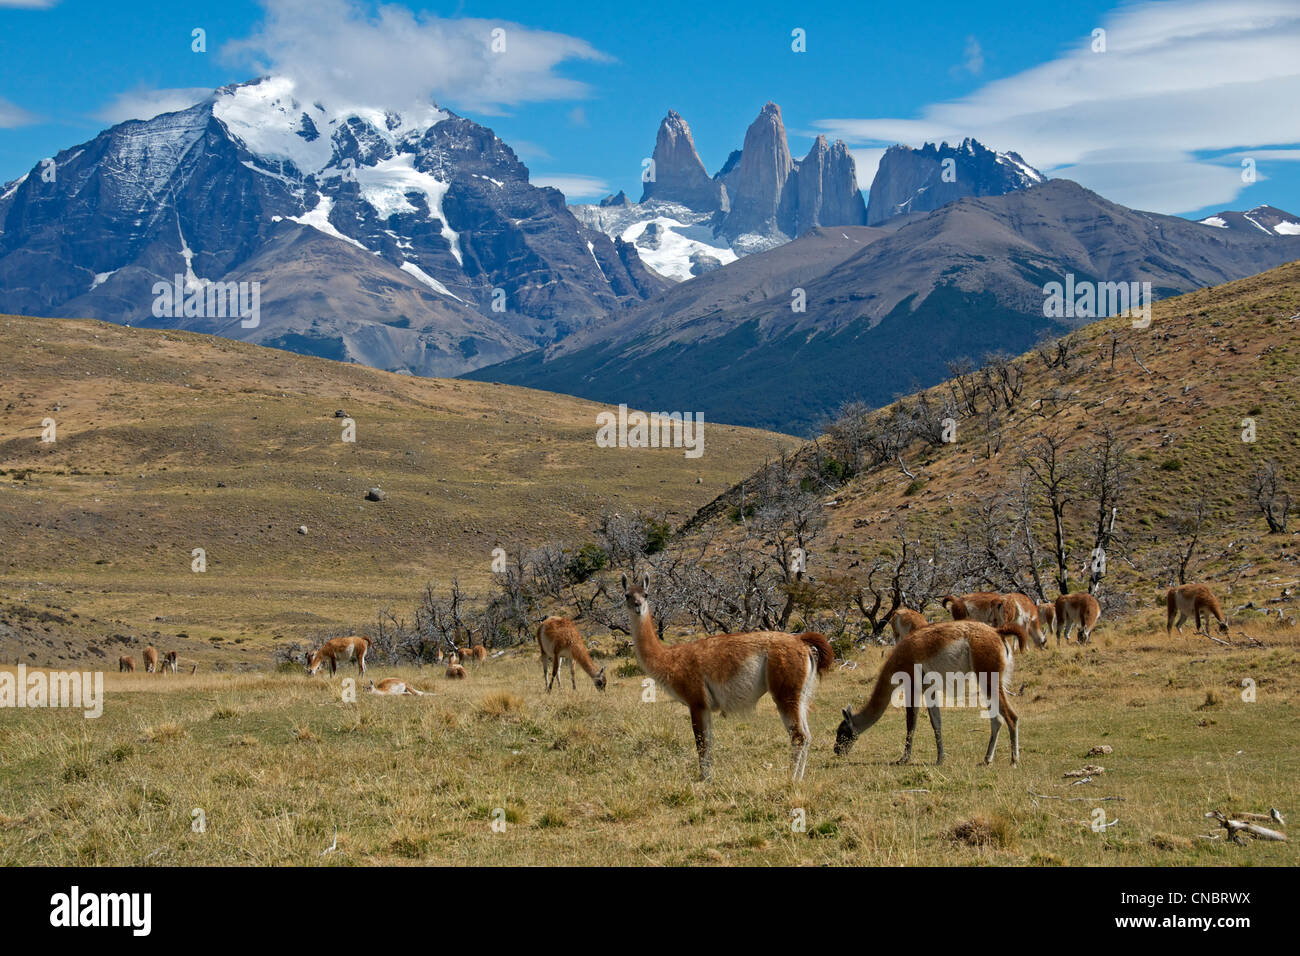 Grazing Guanaco Torres del Paine National Park Patagonia Chile Stock Photo